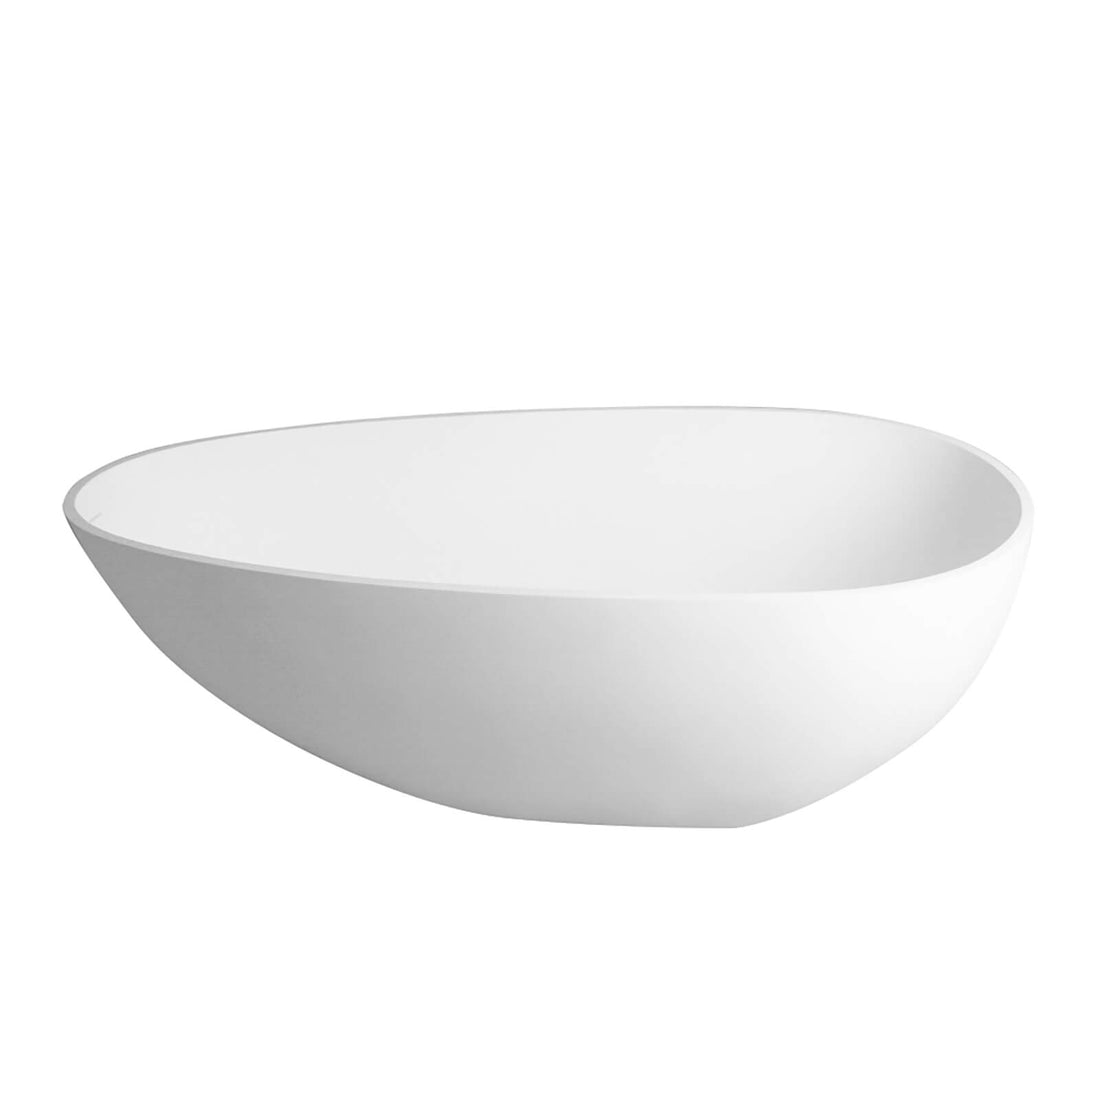 High end mid sized matte white egg shaped solid surface bathtub